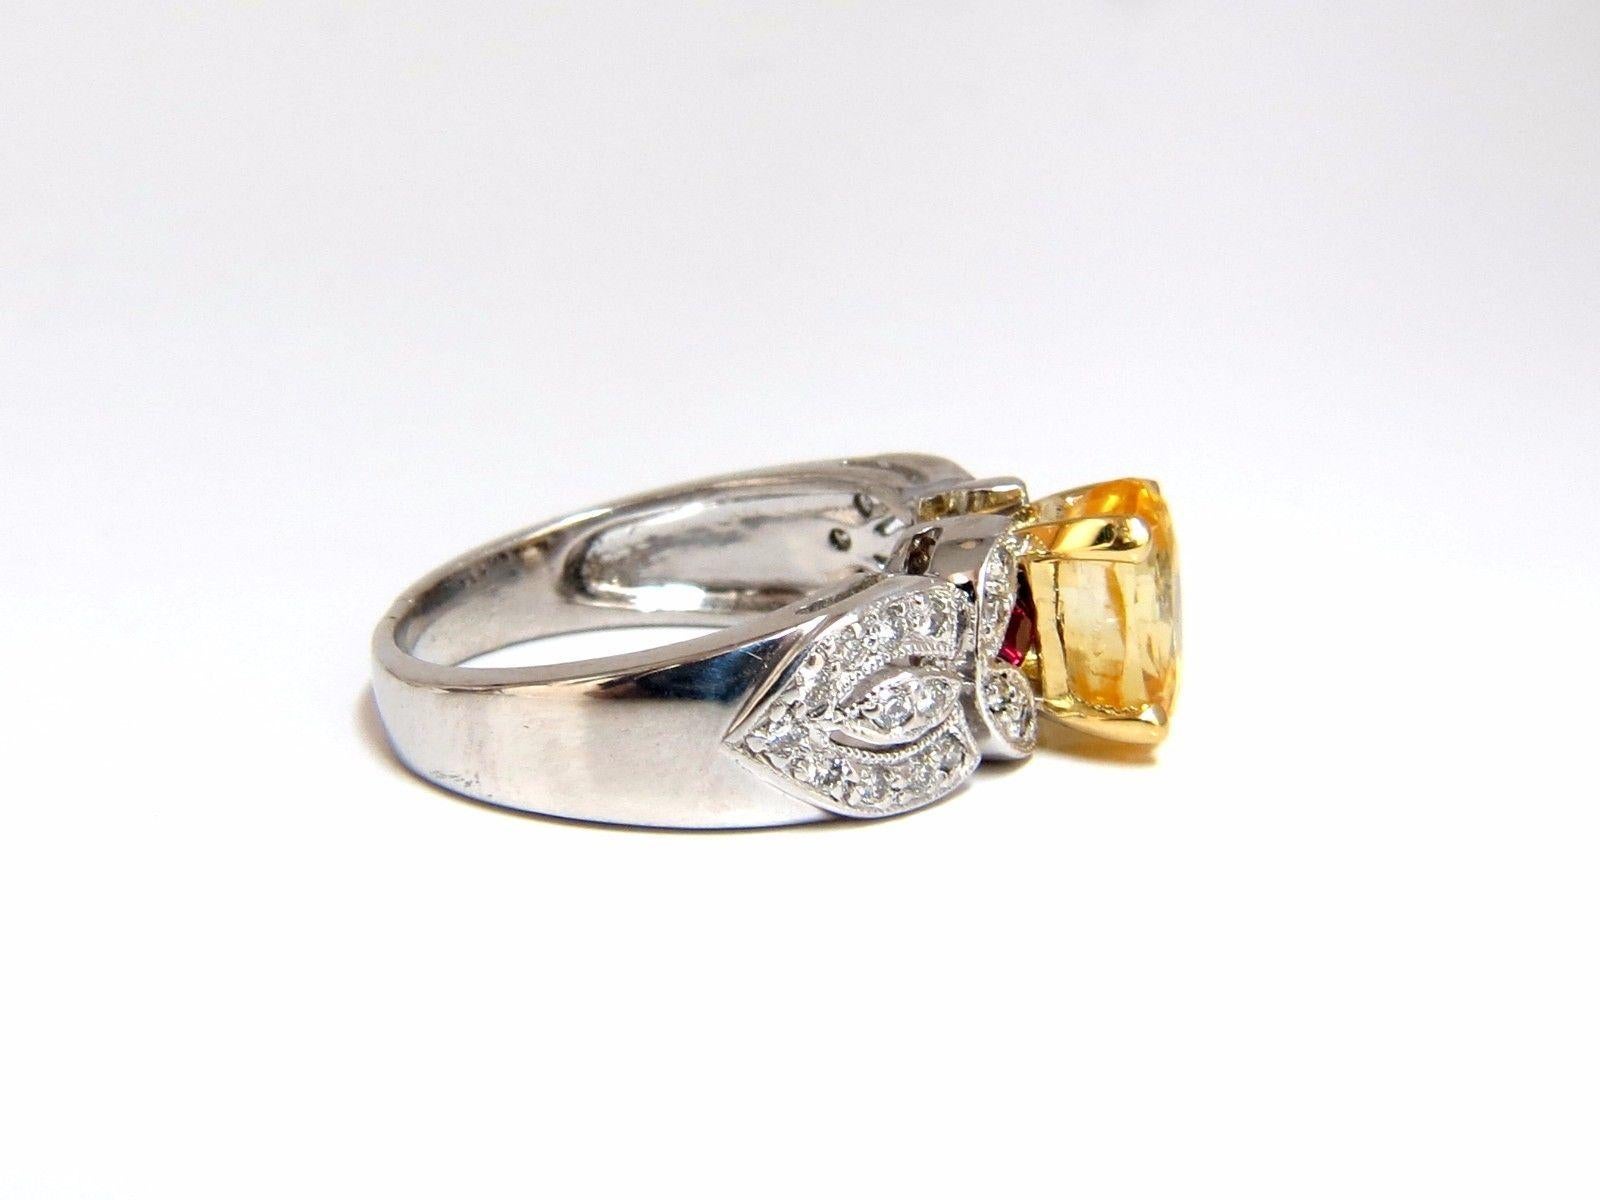 Oval Cut 3.28 Carat Natural Yellow Sapphire Diamonds Ring Platinum For Sale